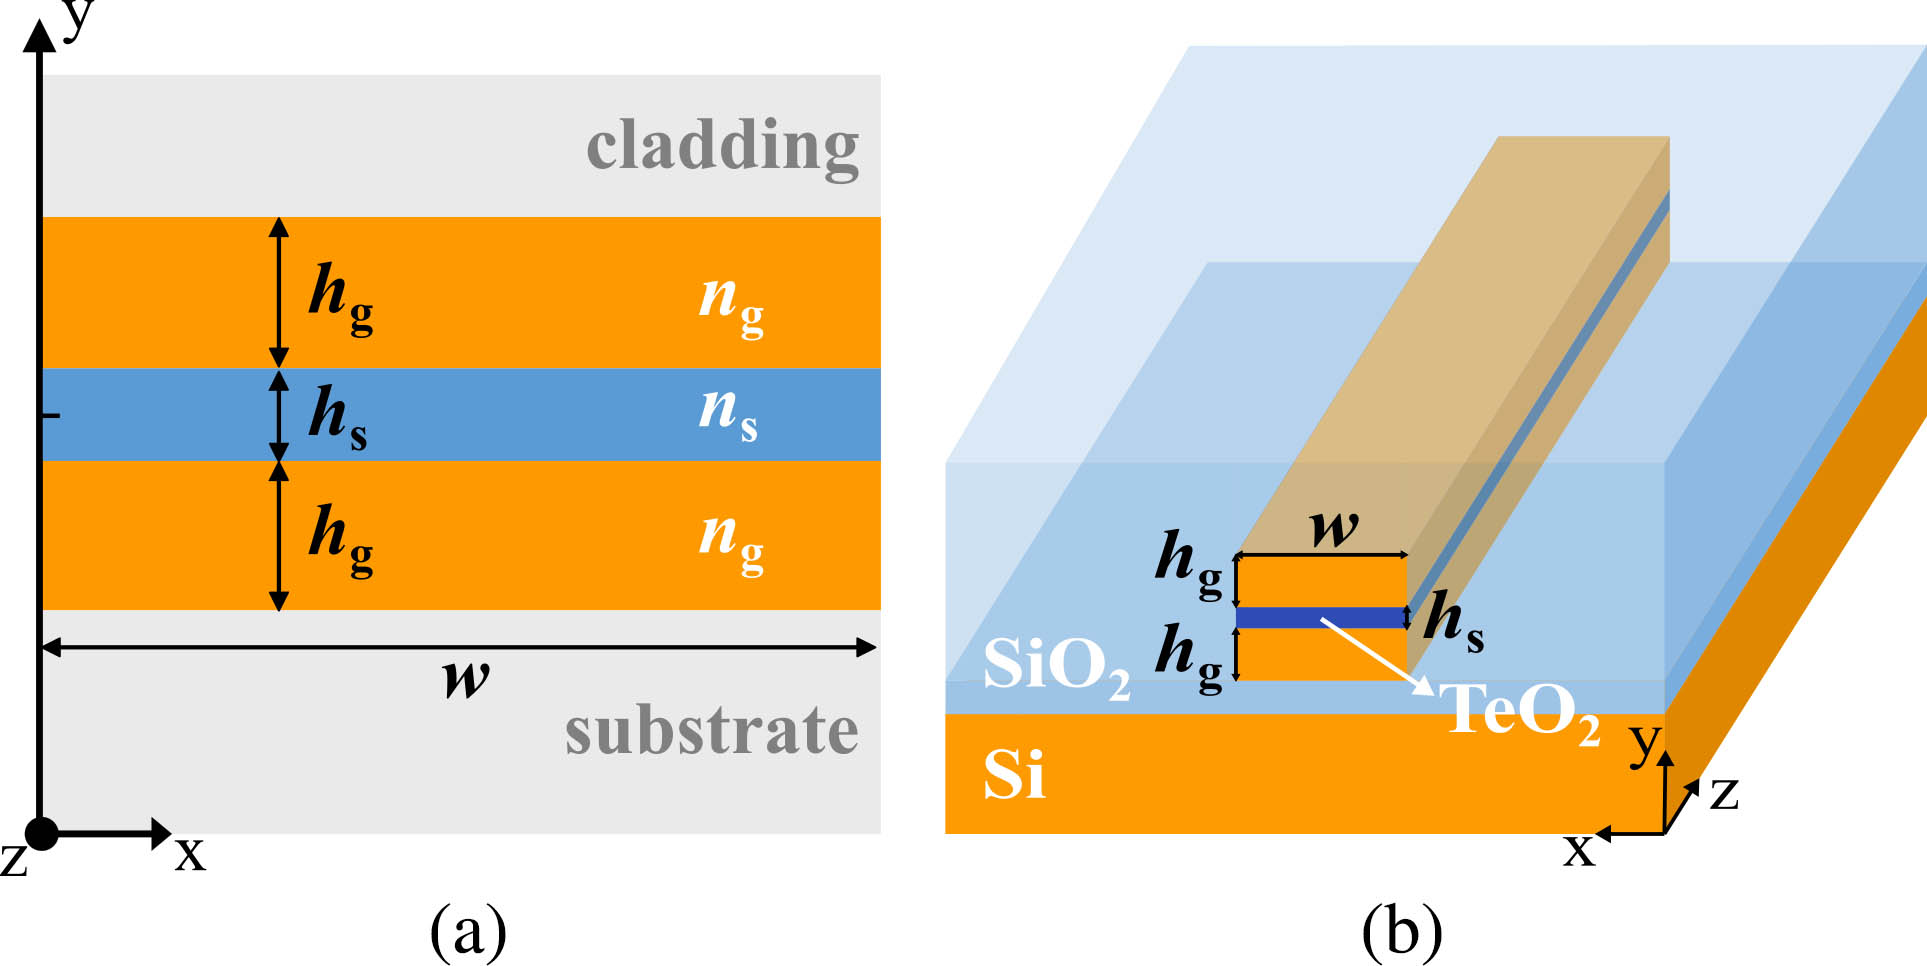 Structure of slot waveguide. (a) Two-dimensional schematic of horizontal slot waveguide; (b) three-dimensional schematic of horizontal slot waveguide.